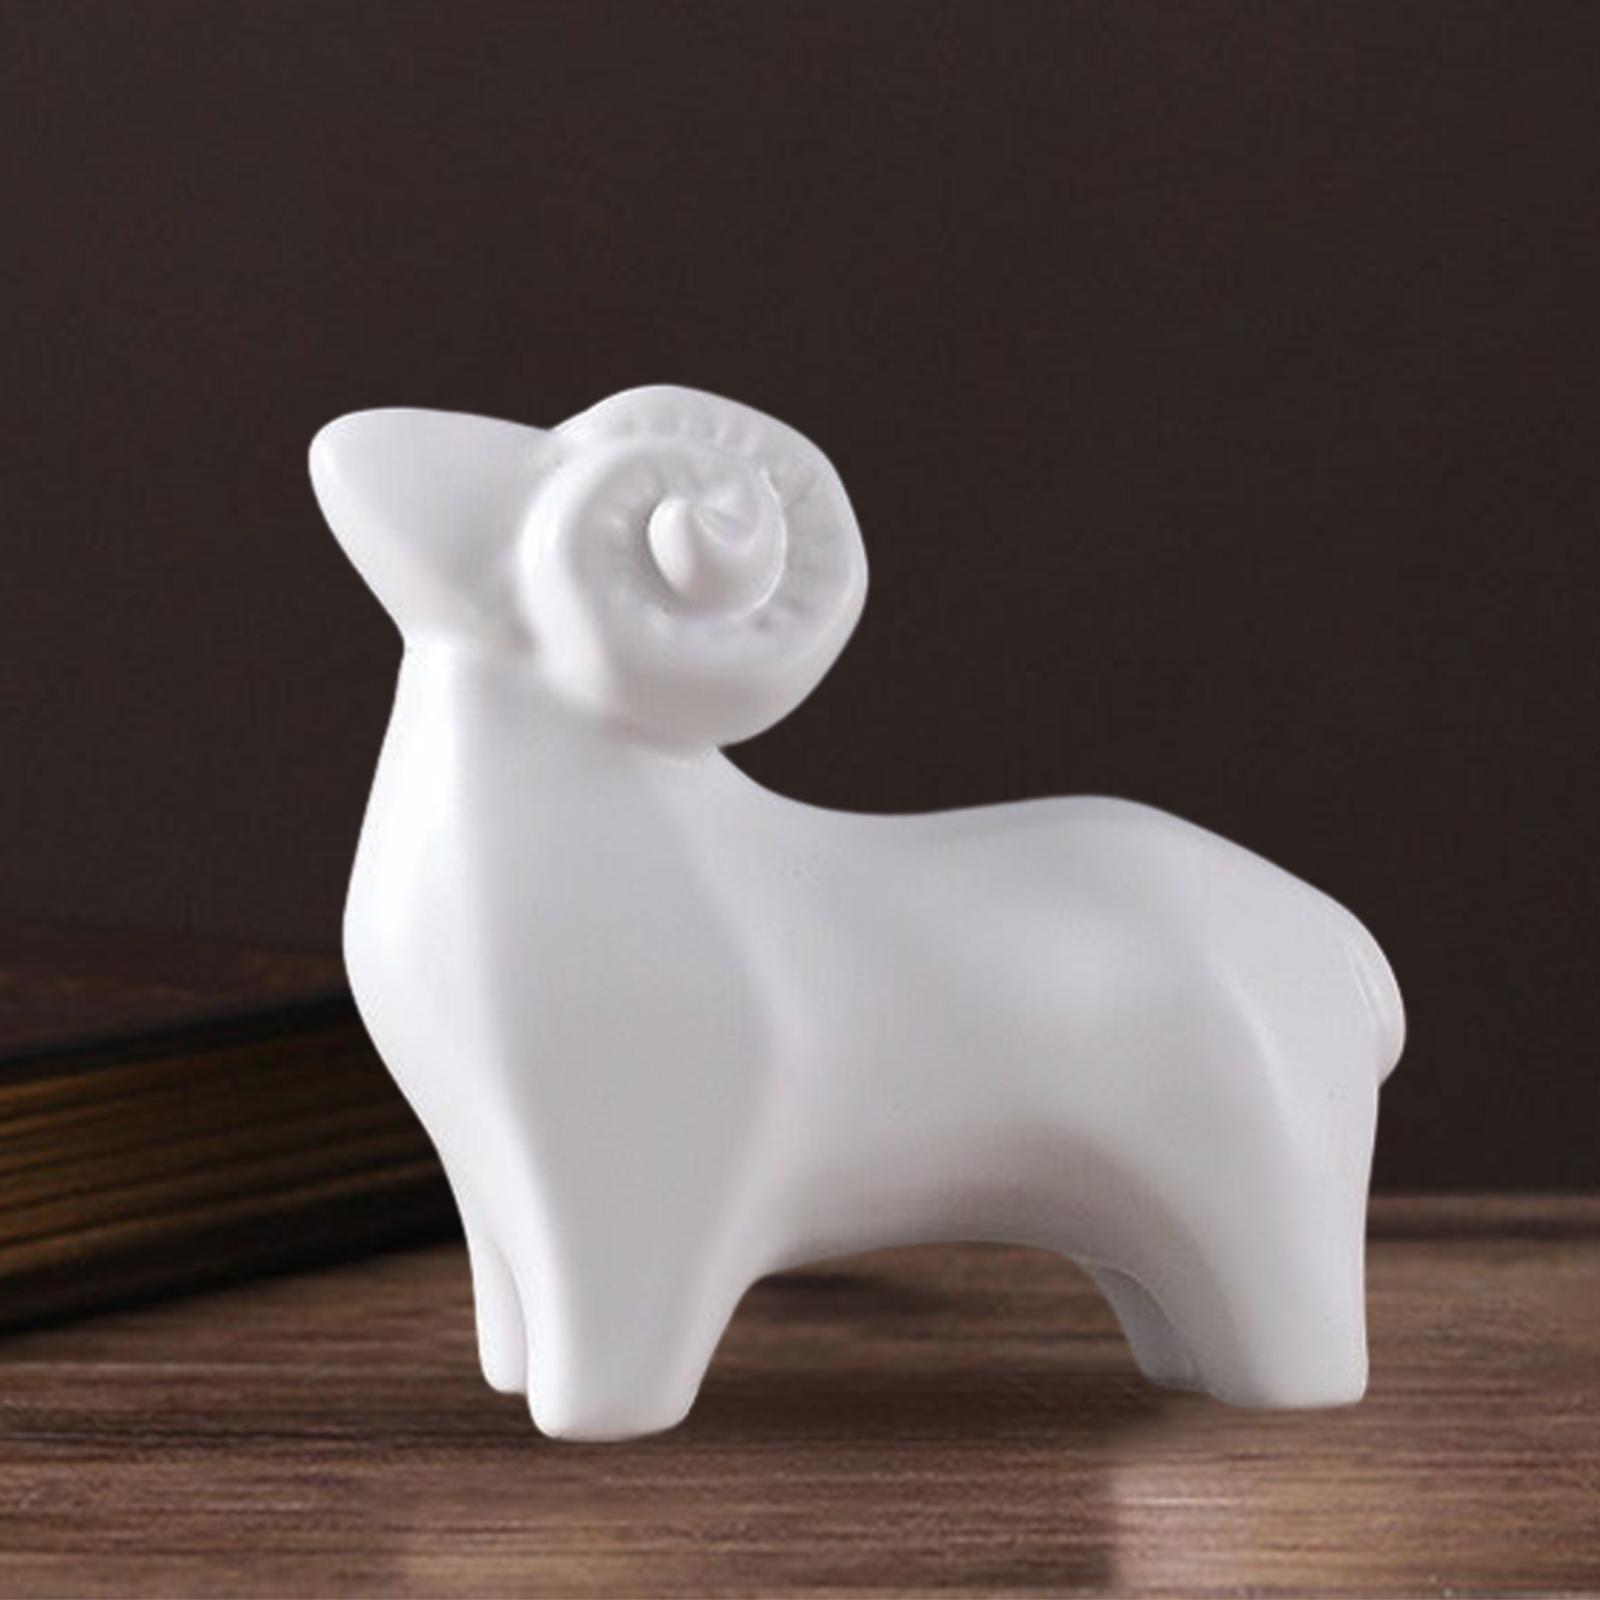 Creative Sheep Statue, Porcelain Nordic Collectable Ornament Animal Figurine for Desktop Bedroom Shop Bookshelf Decoration White Small - image 5 of 8